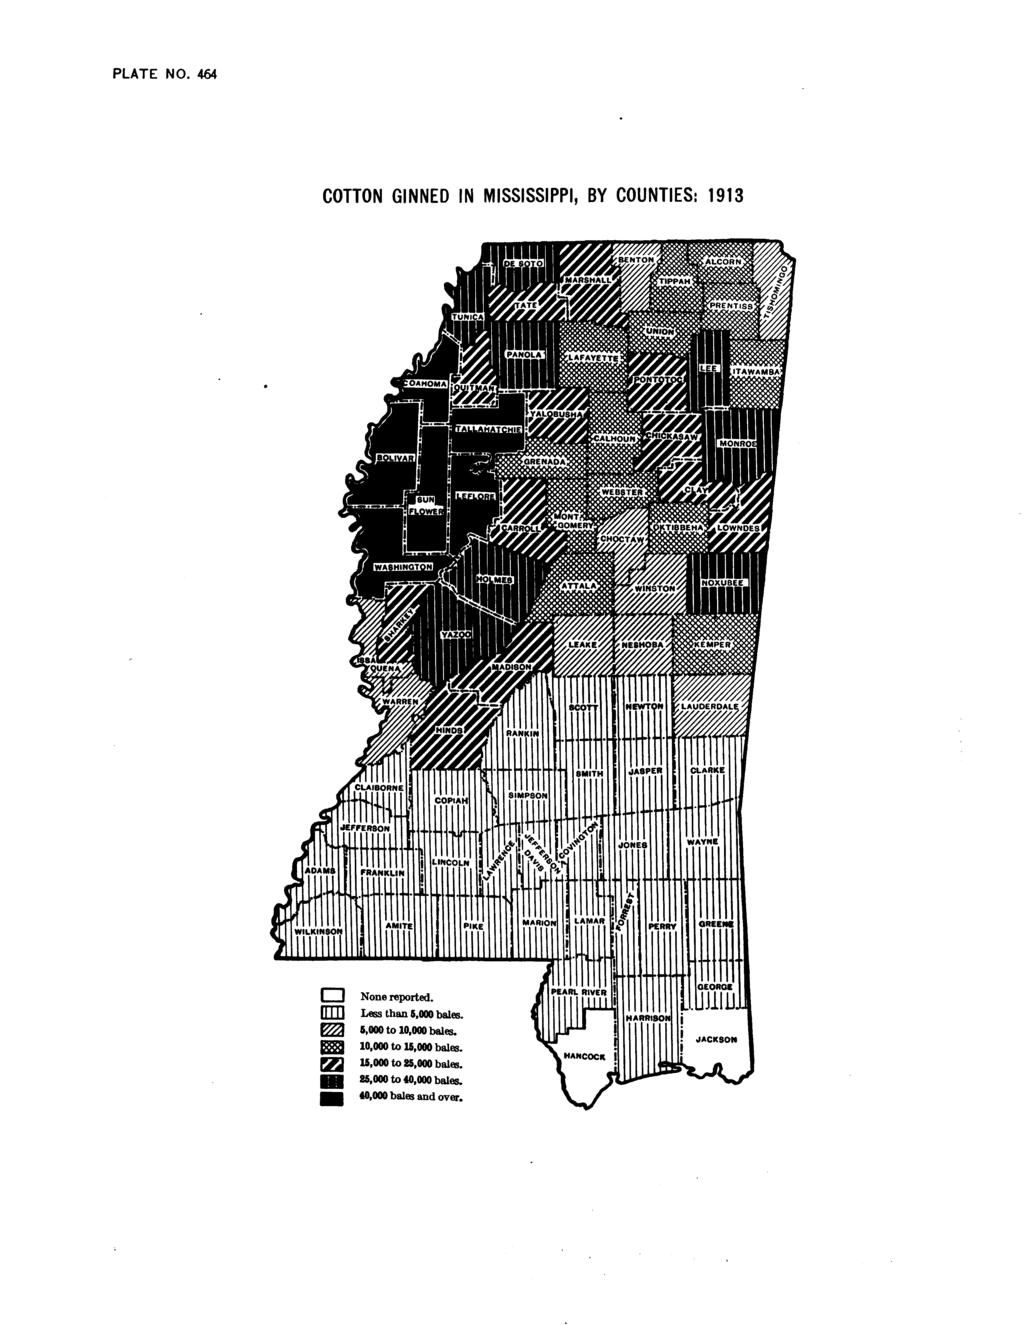 PLATE NO. 464 COTTON GINNED IN MISSISSIPPI, BY COUNTIES: 1913 None reported. r r m Less than 5,000 bales. E 2 3 5.